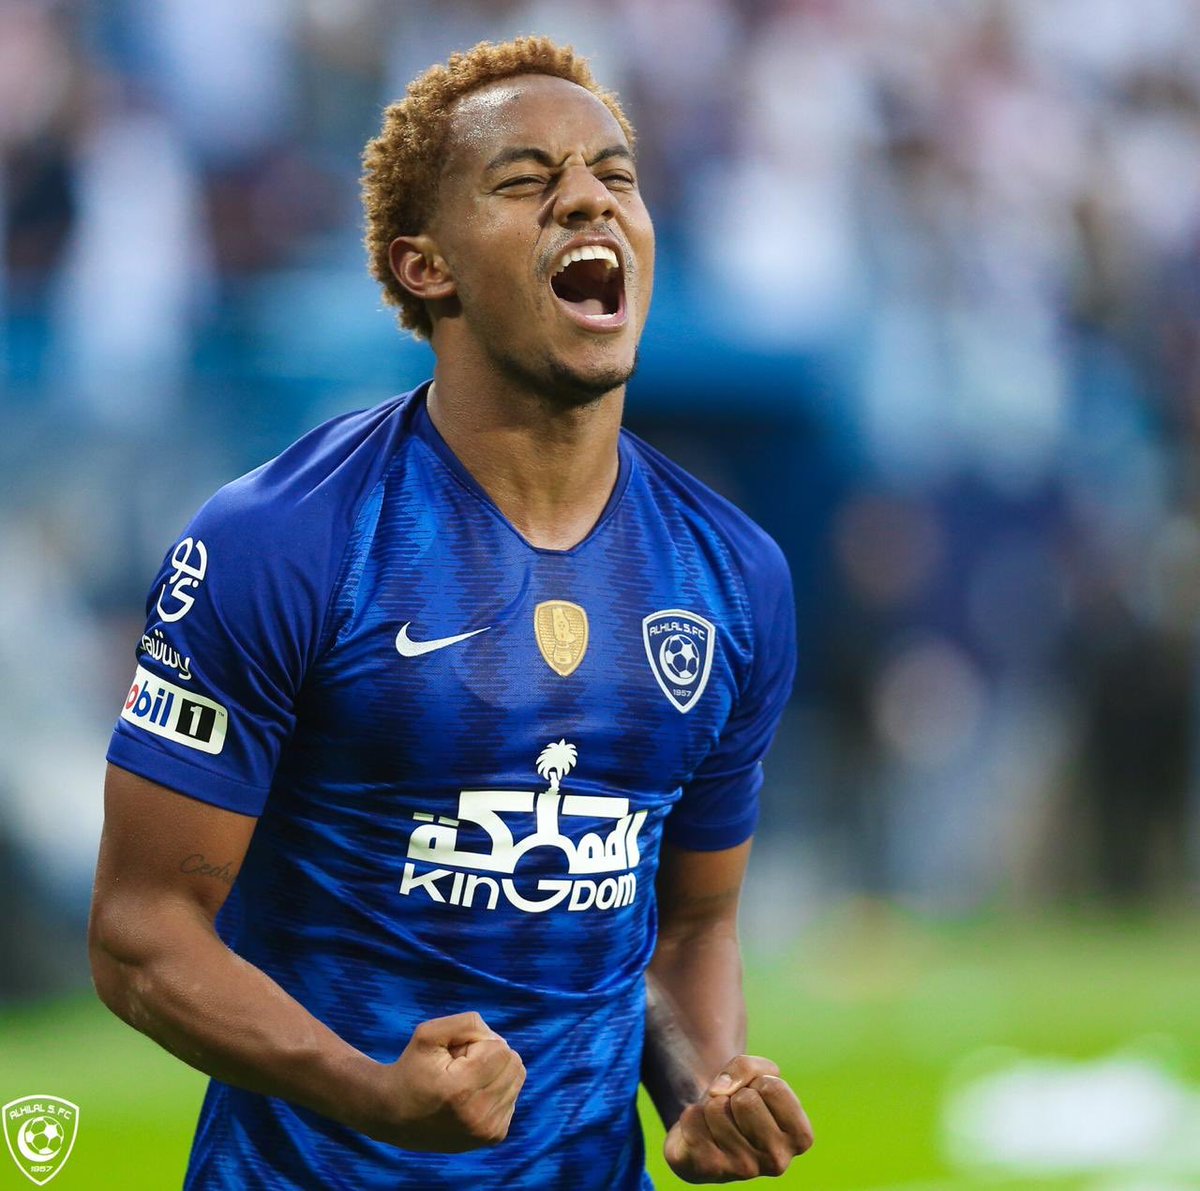 The 31-year old son of father (?) and mother(?) André Carrillo in 2022 photo. André Carrillo earned a  million dollar salary - leaving the net worth at  million in 2022